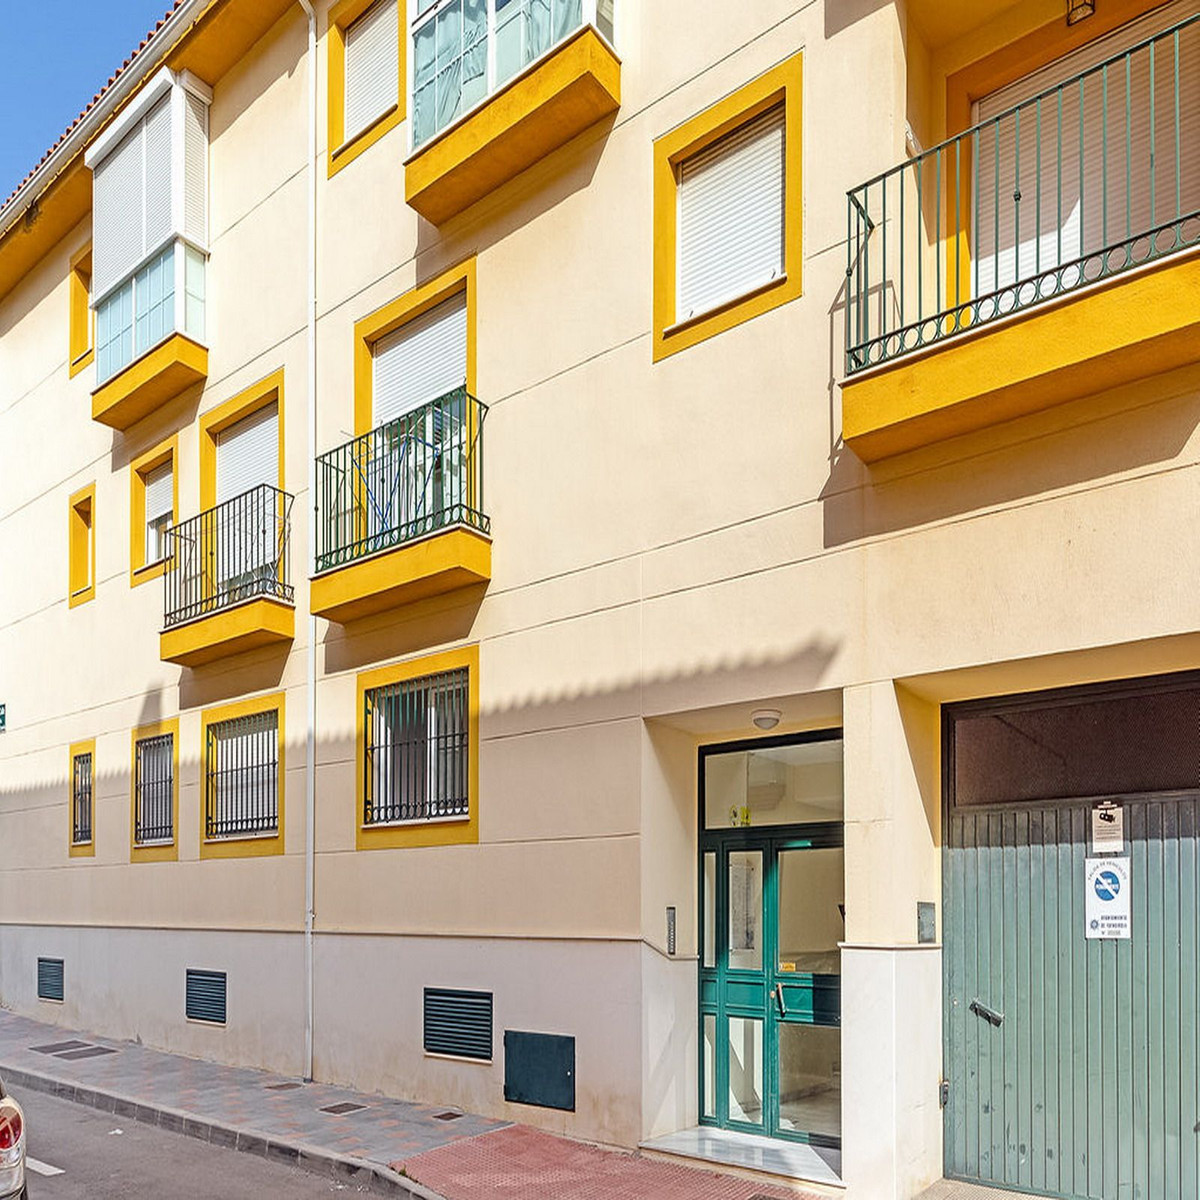 						Apartment  Ground Floor
													for sale 
																			 in Los Boliches
					